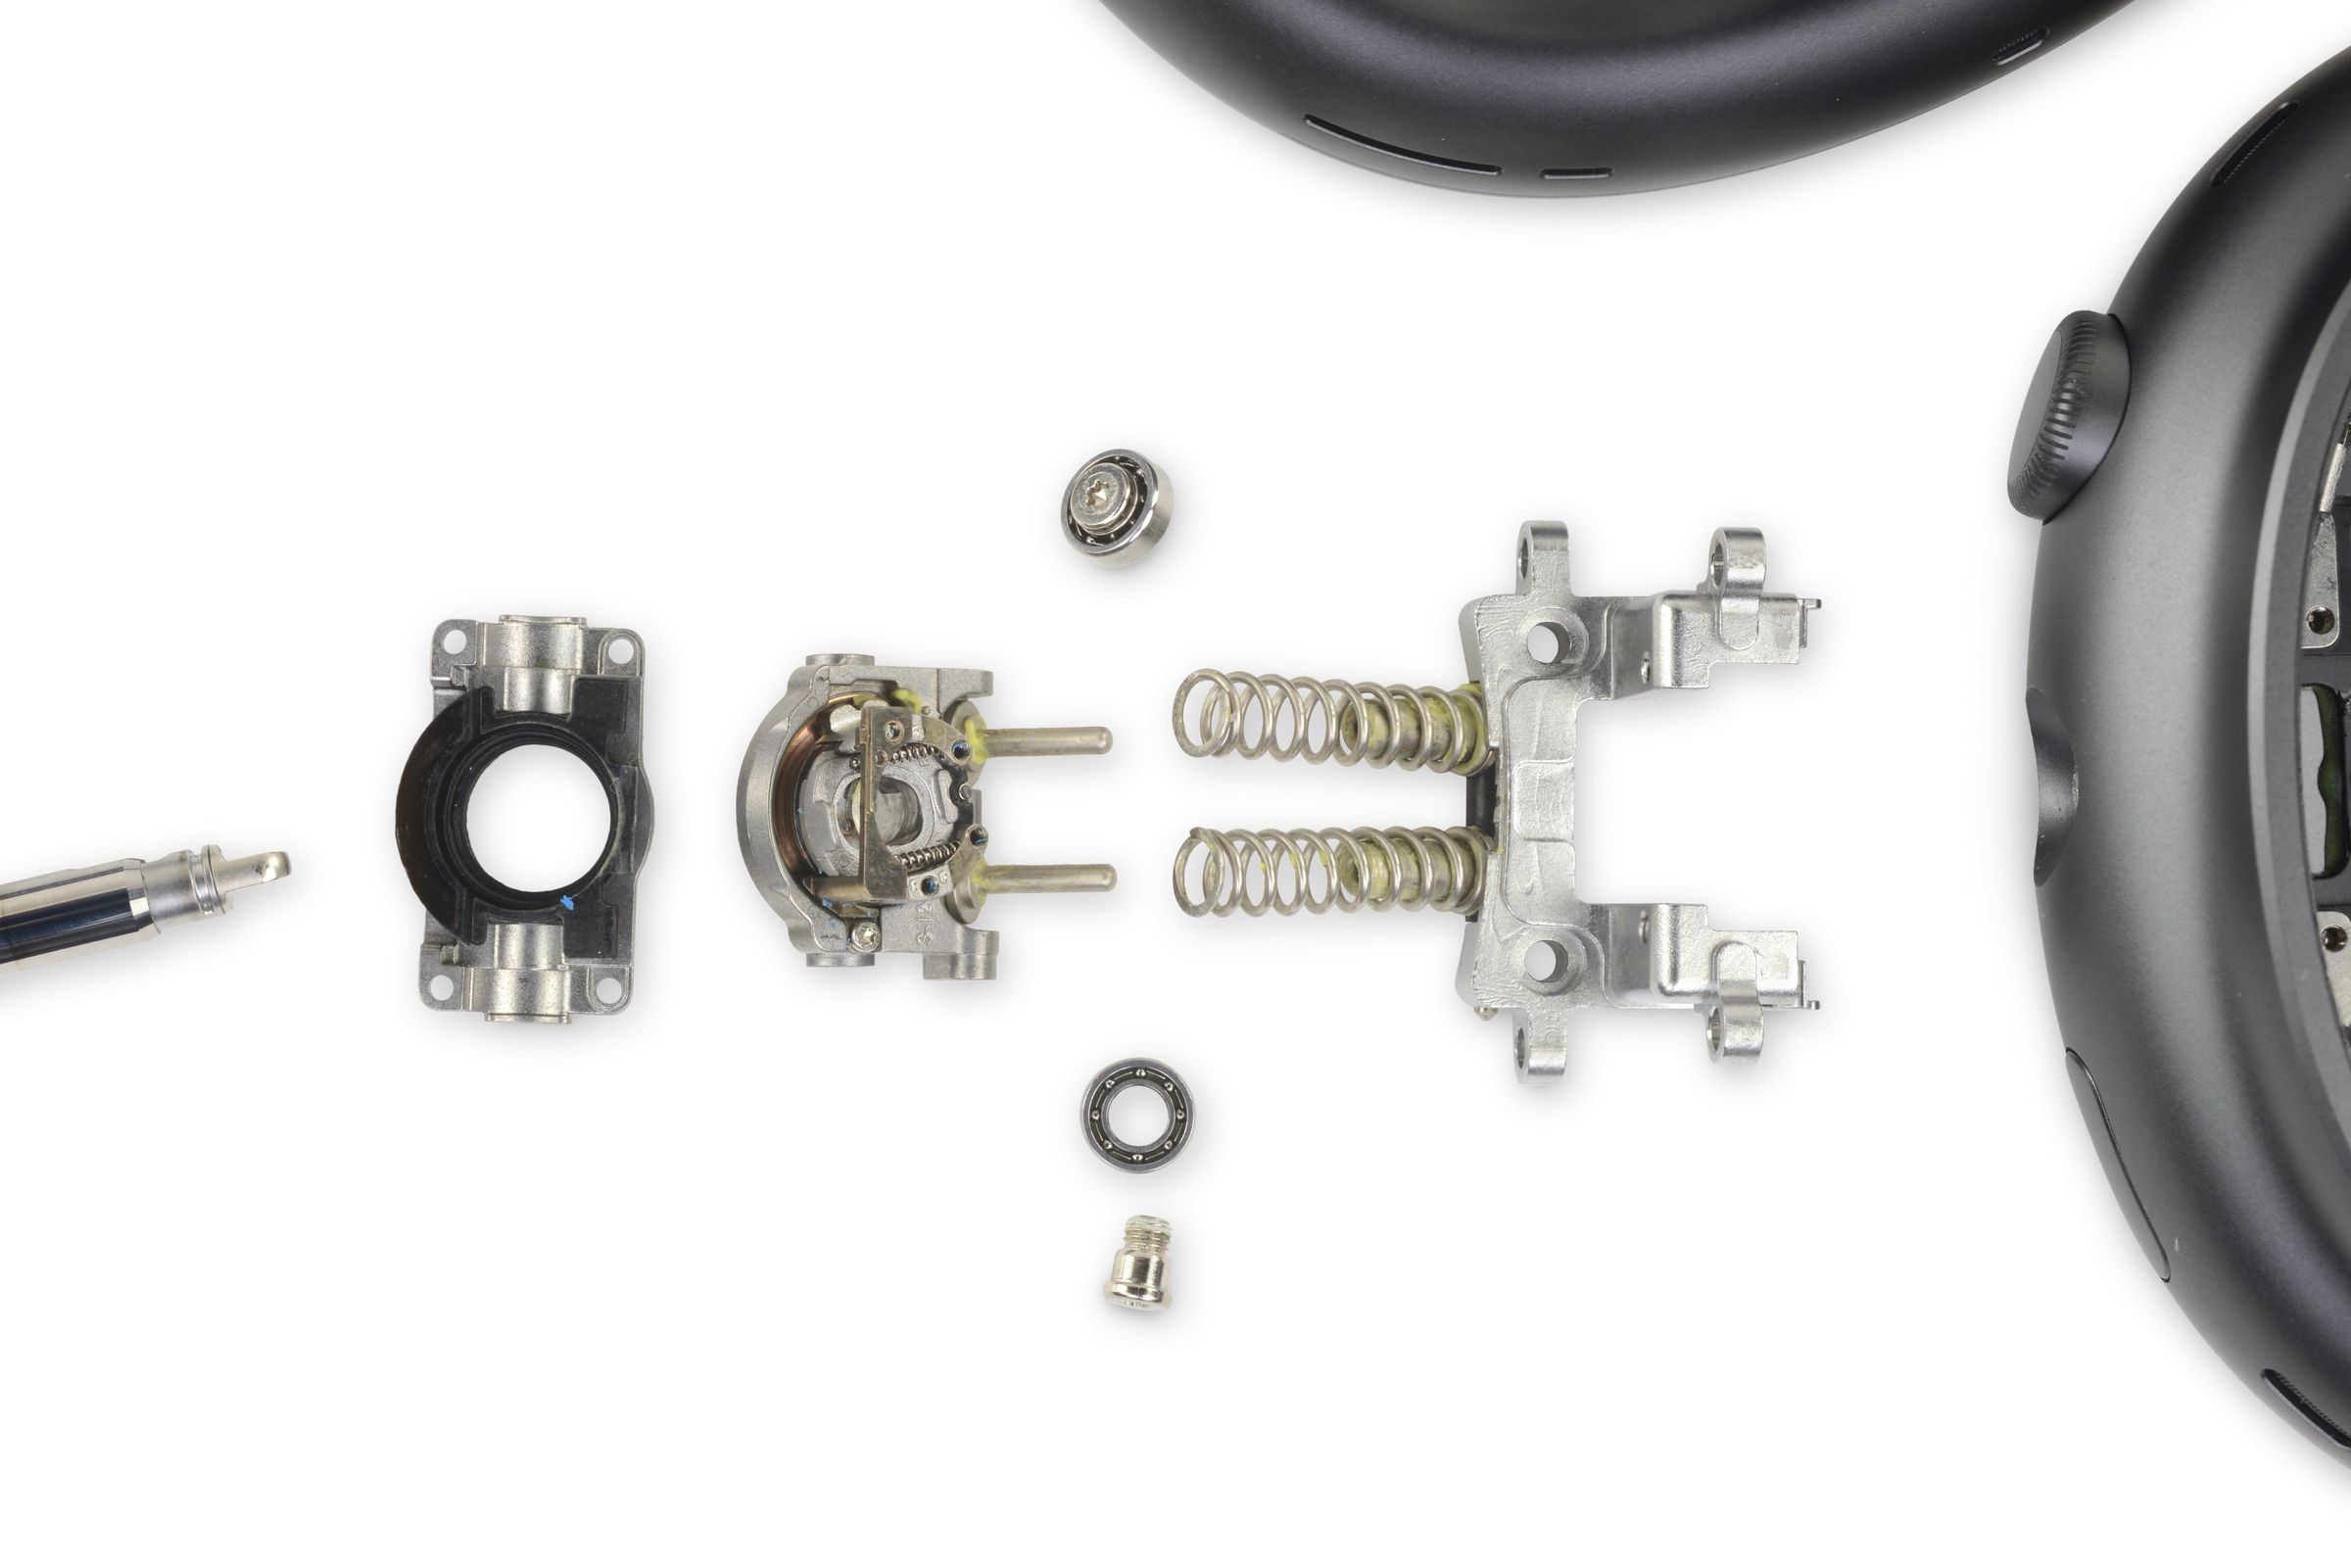 The inside of what iFixit calls “perhaps the most elaborate part” of the headphones.